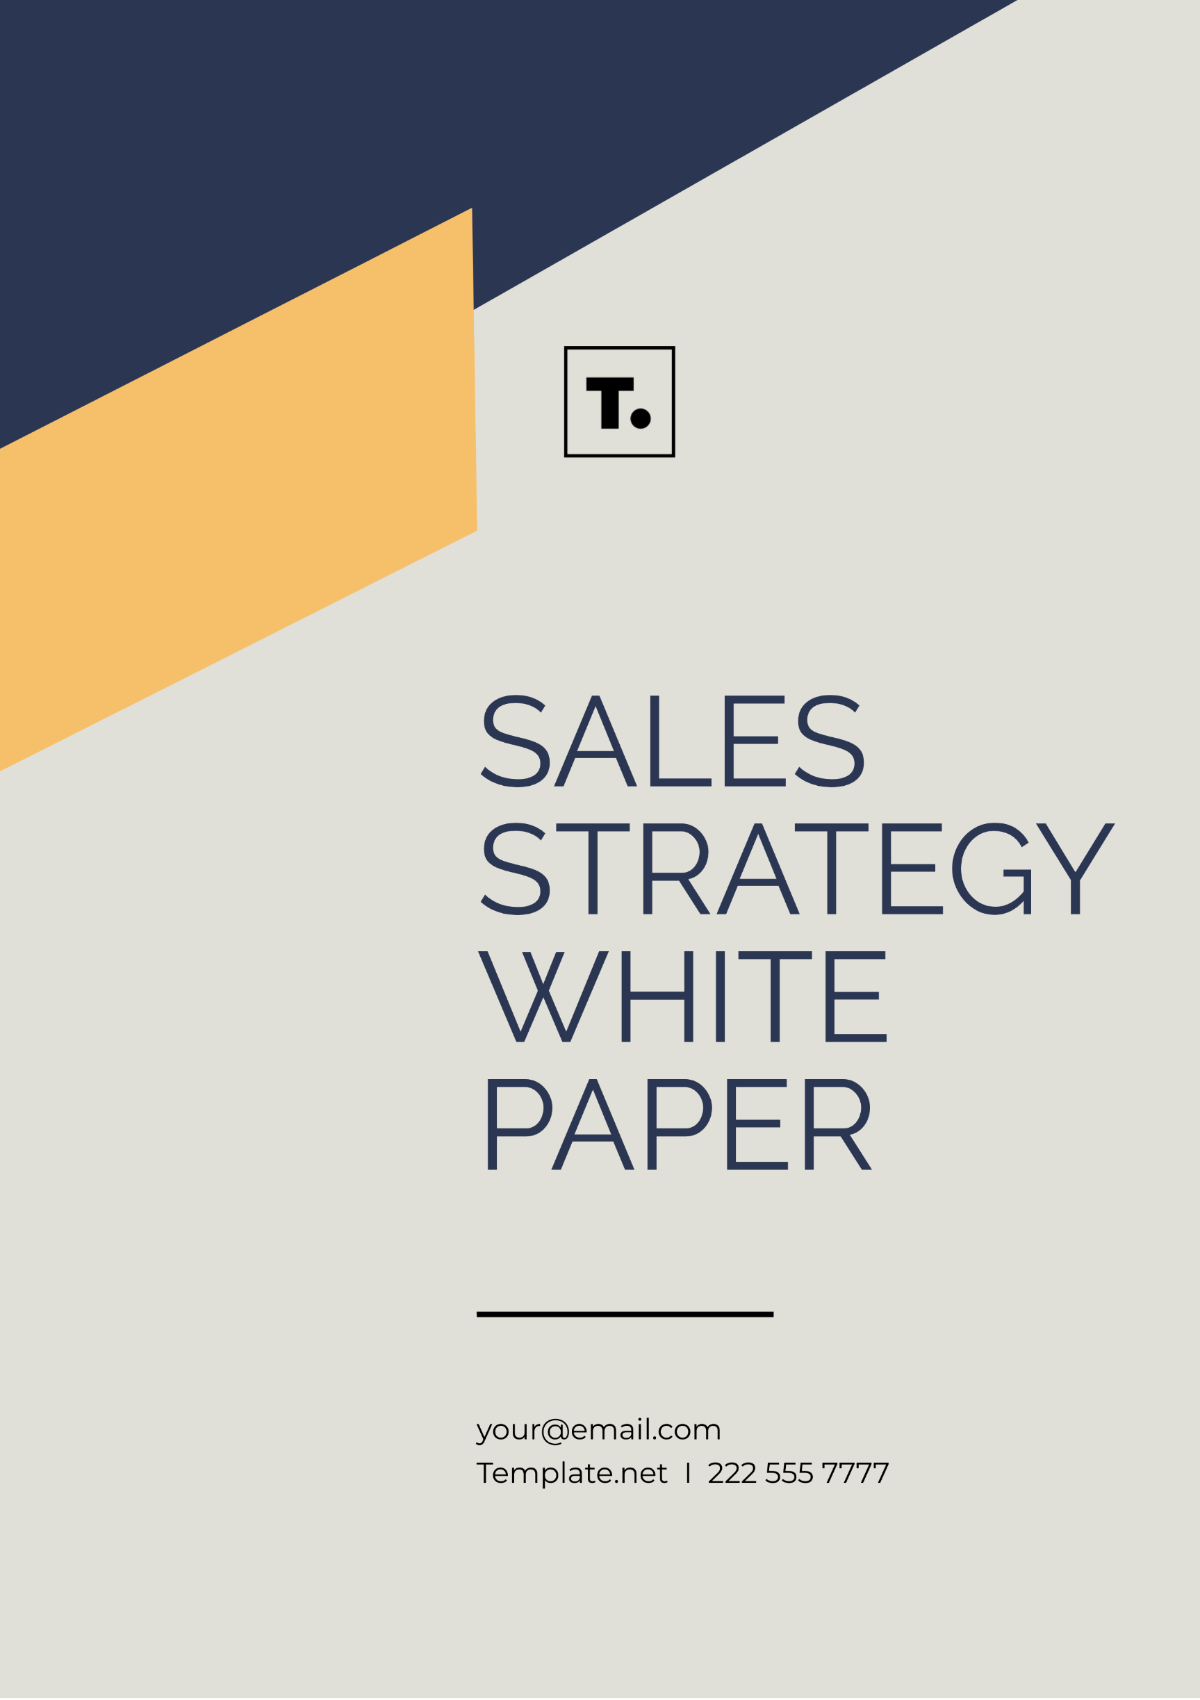 Sales Strategy White Paper Template